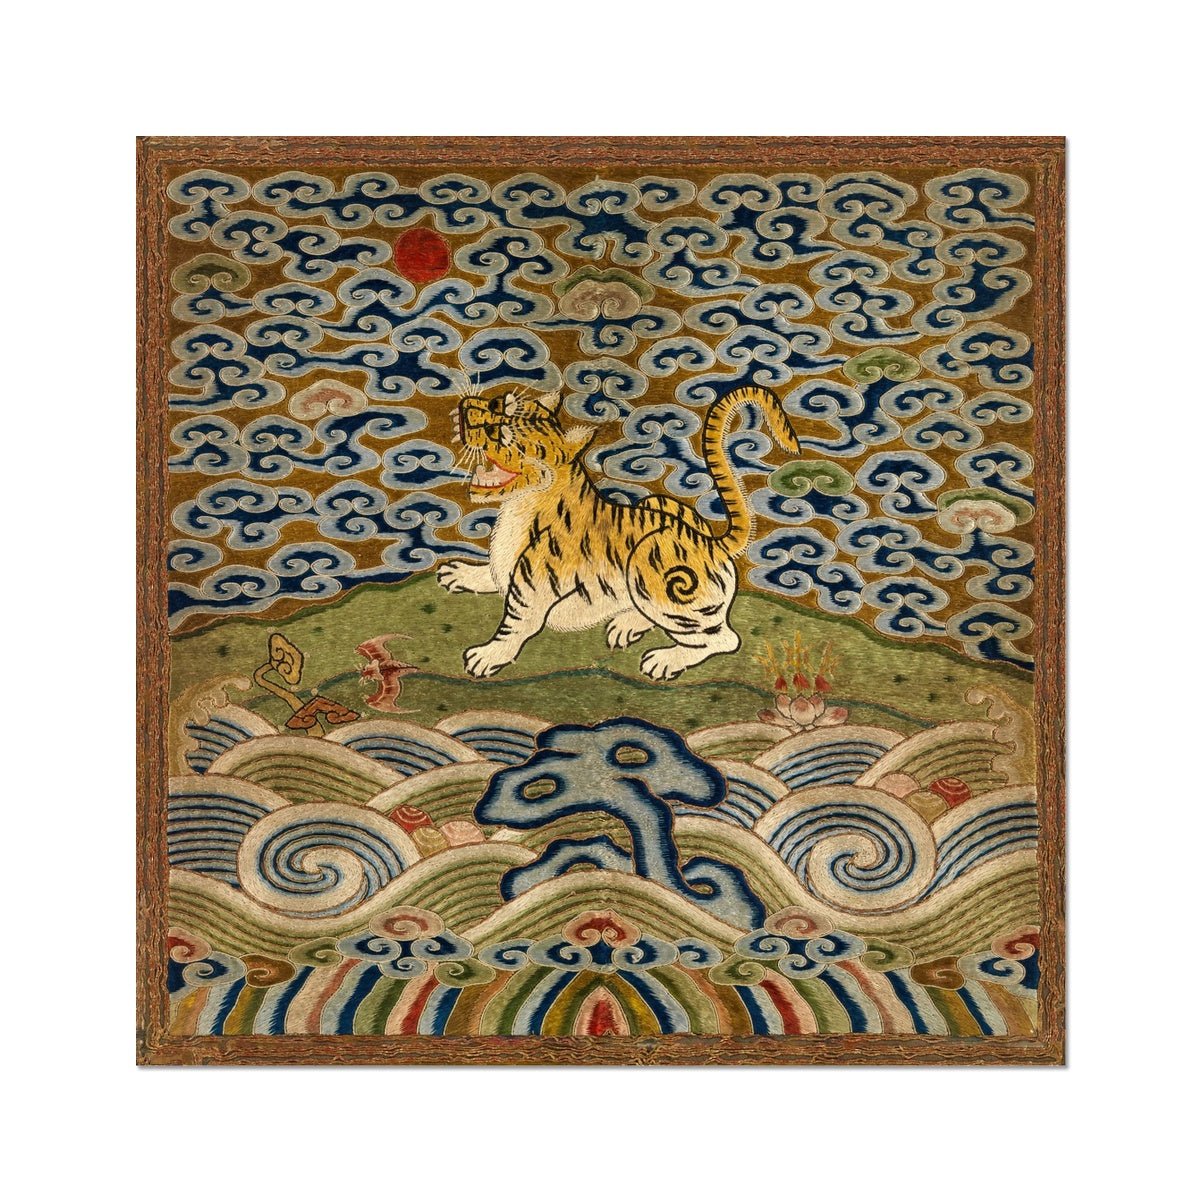 Fine art 6"x6" Qing Dynasty, Chinese Silk Embroidery | Leopard Lion Cat Lover Panther Mandarin Square Thangka | Vintage Fine Art Print